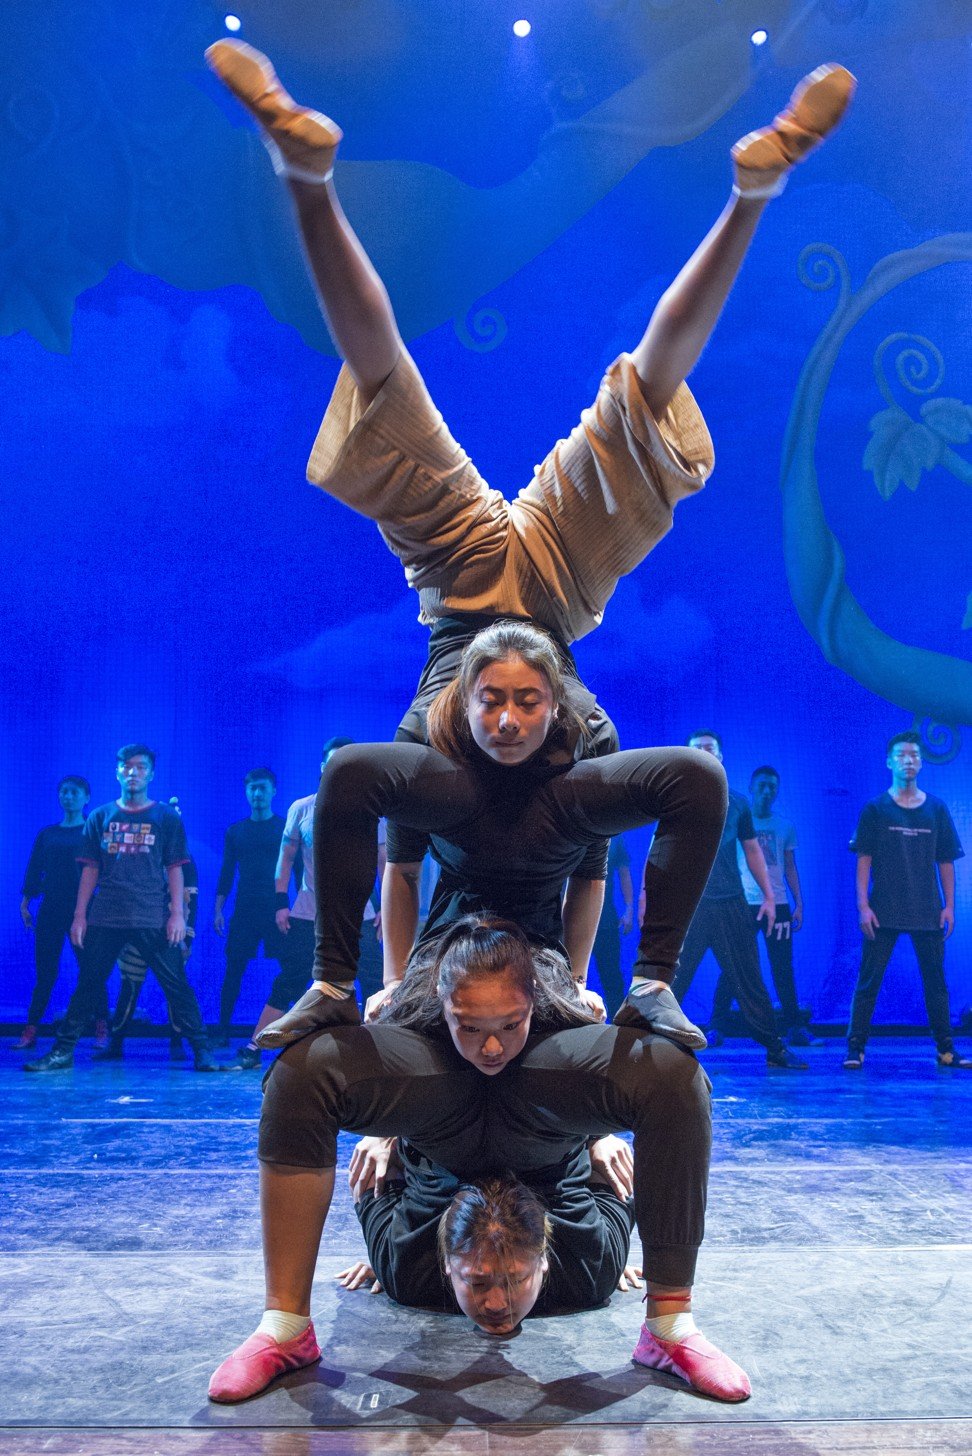 Members of the Shenyang Acrobatic Troupe, including Guo Shenyu (top) and Sun Qiyue (middle), rehearse Panda: A Voyage Looking for a Dream at the Shengjing Grand Theatre. Photo: Zigor Aldama